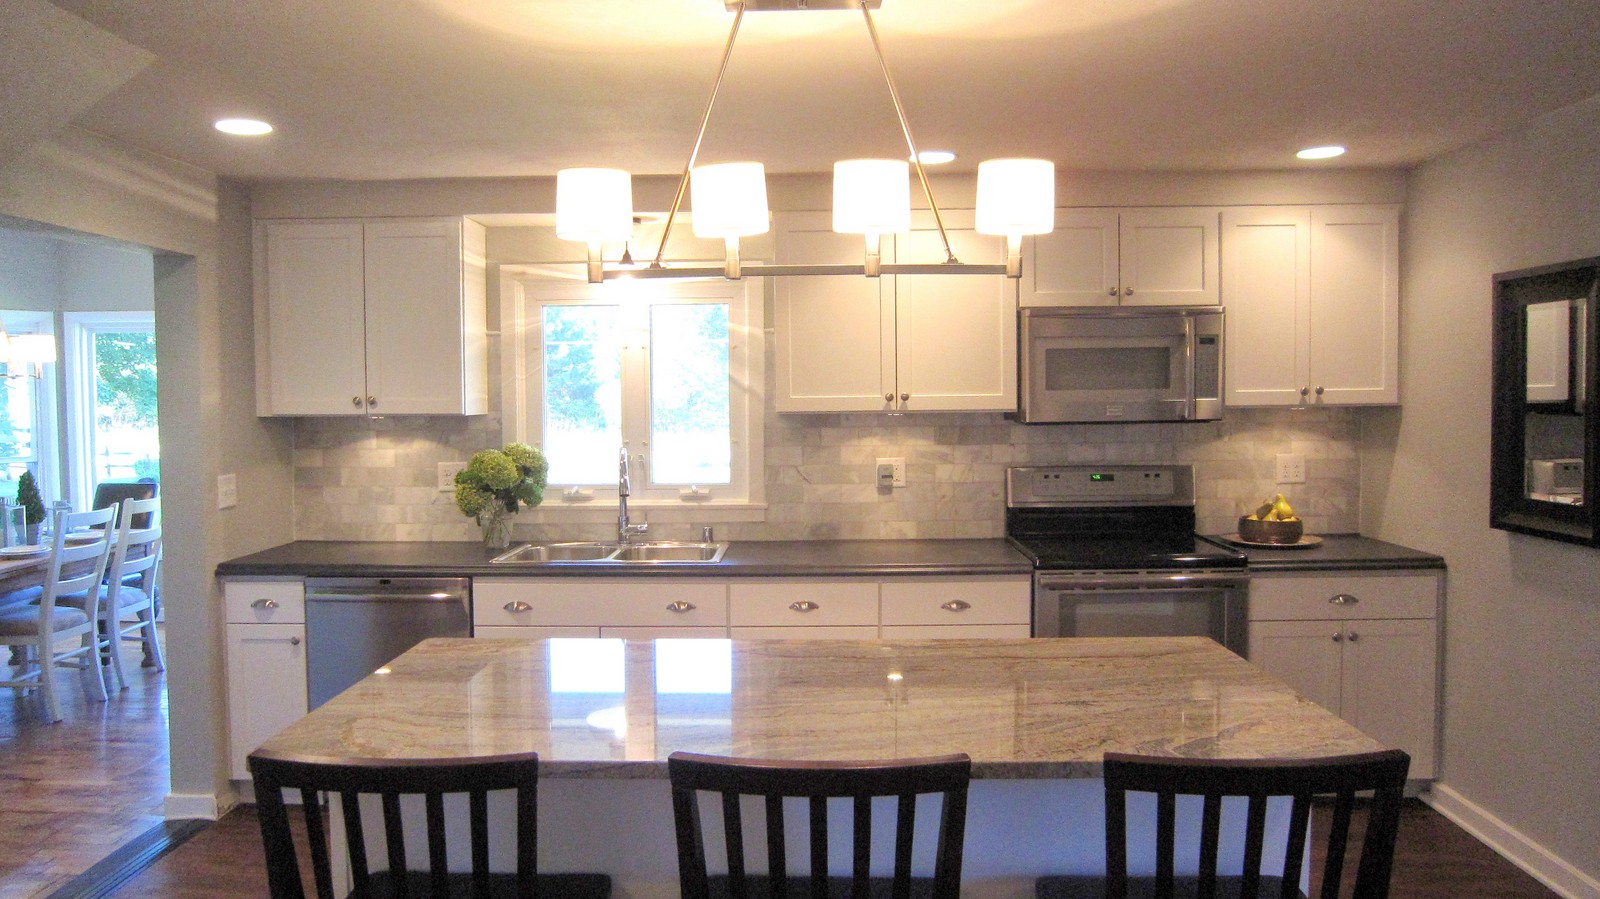 BEFORE & AFTER: Affordable Farmhouse Kitchen Renovation - Gray and White - Granite and Laminate Counters - Marble Backsplash